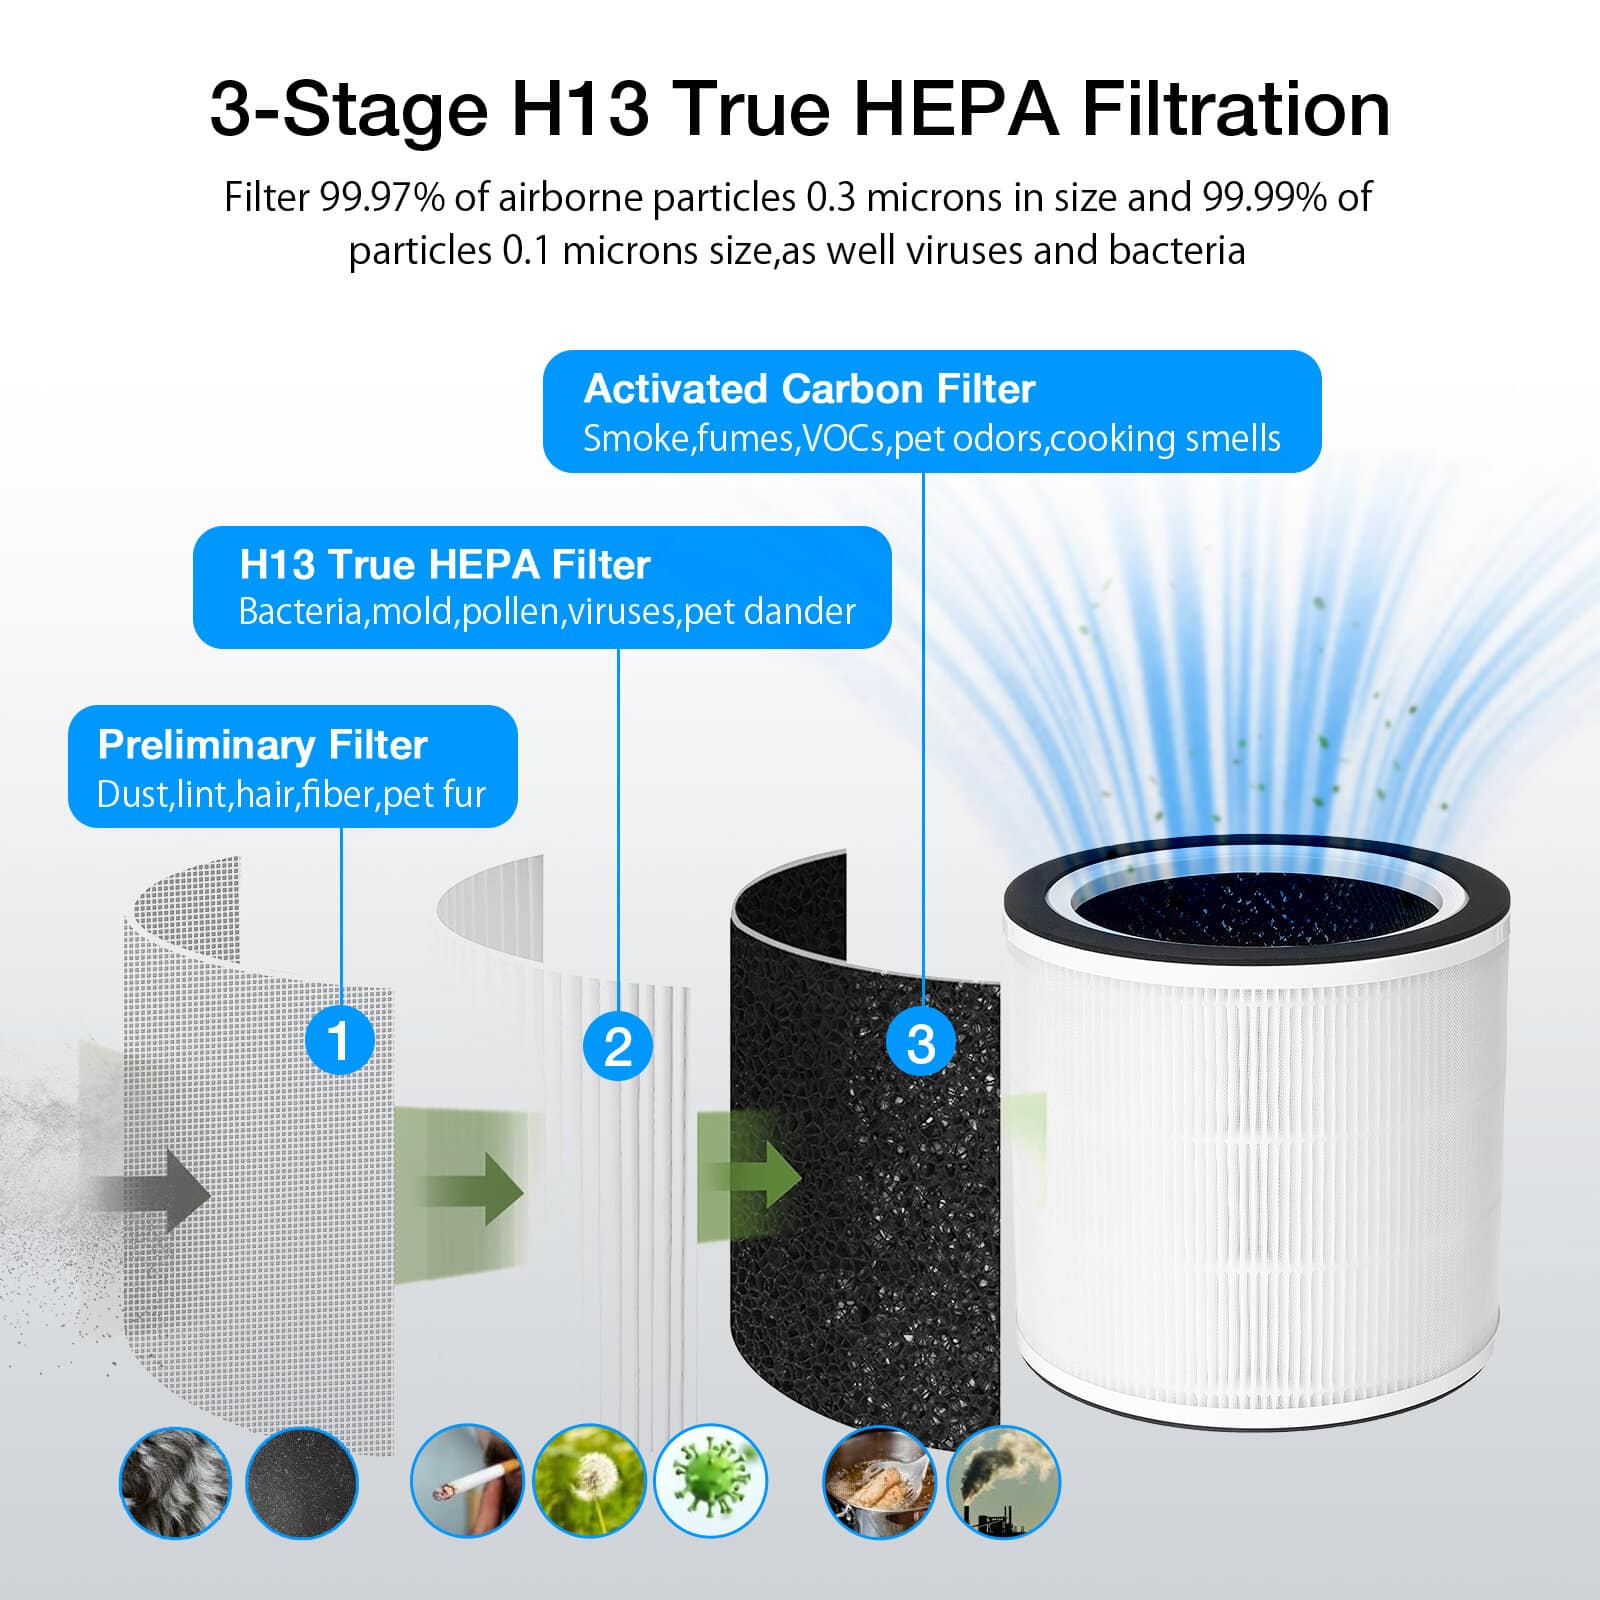 3-stage hepa filtration